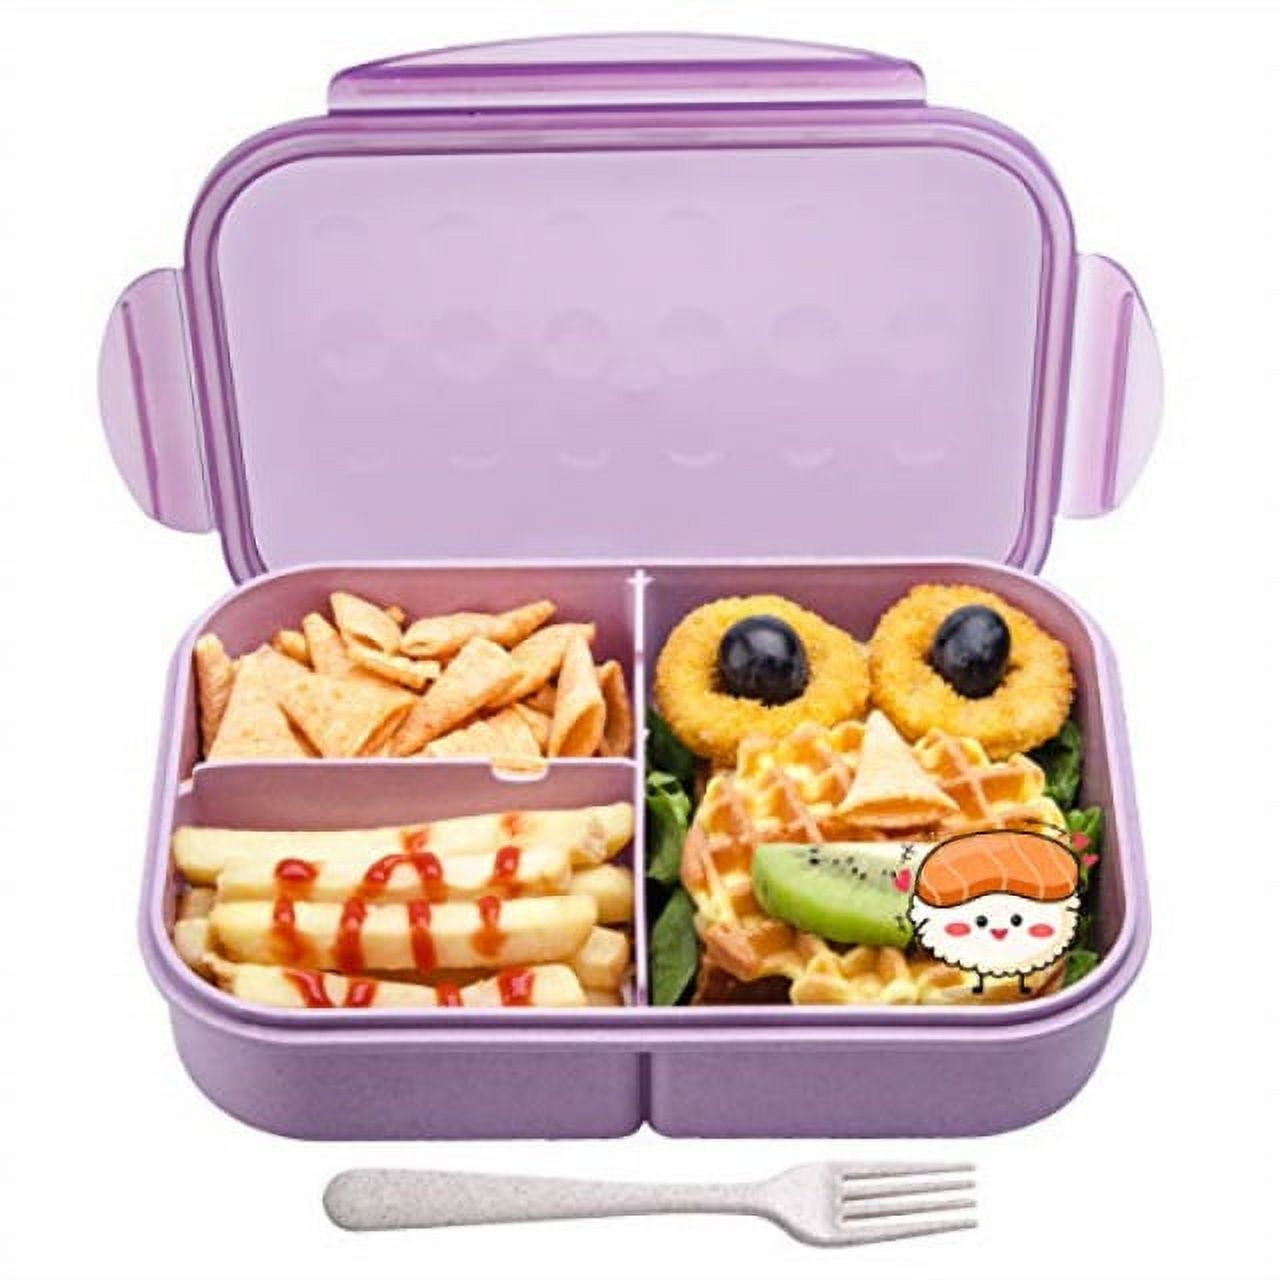 Bento Boxes for Kids Lunches, Snack Containers with Lids, Toddler Baby  Lunch Box for Daycare, Lunch-…See more Bento Boxes for Kids Lunches, Snack